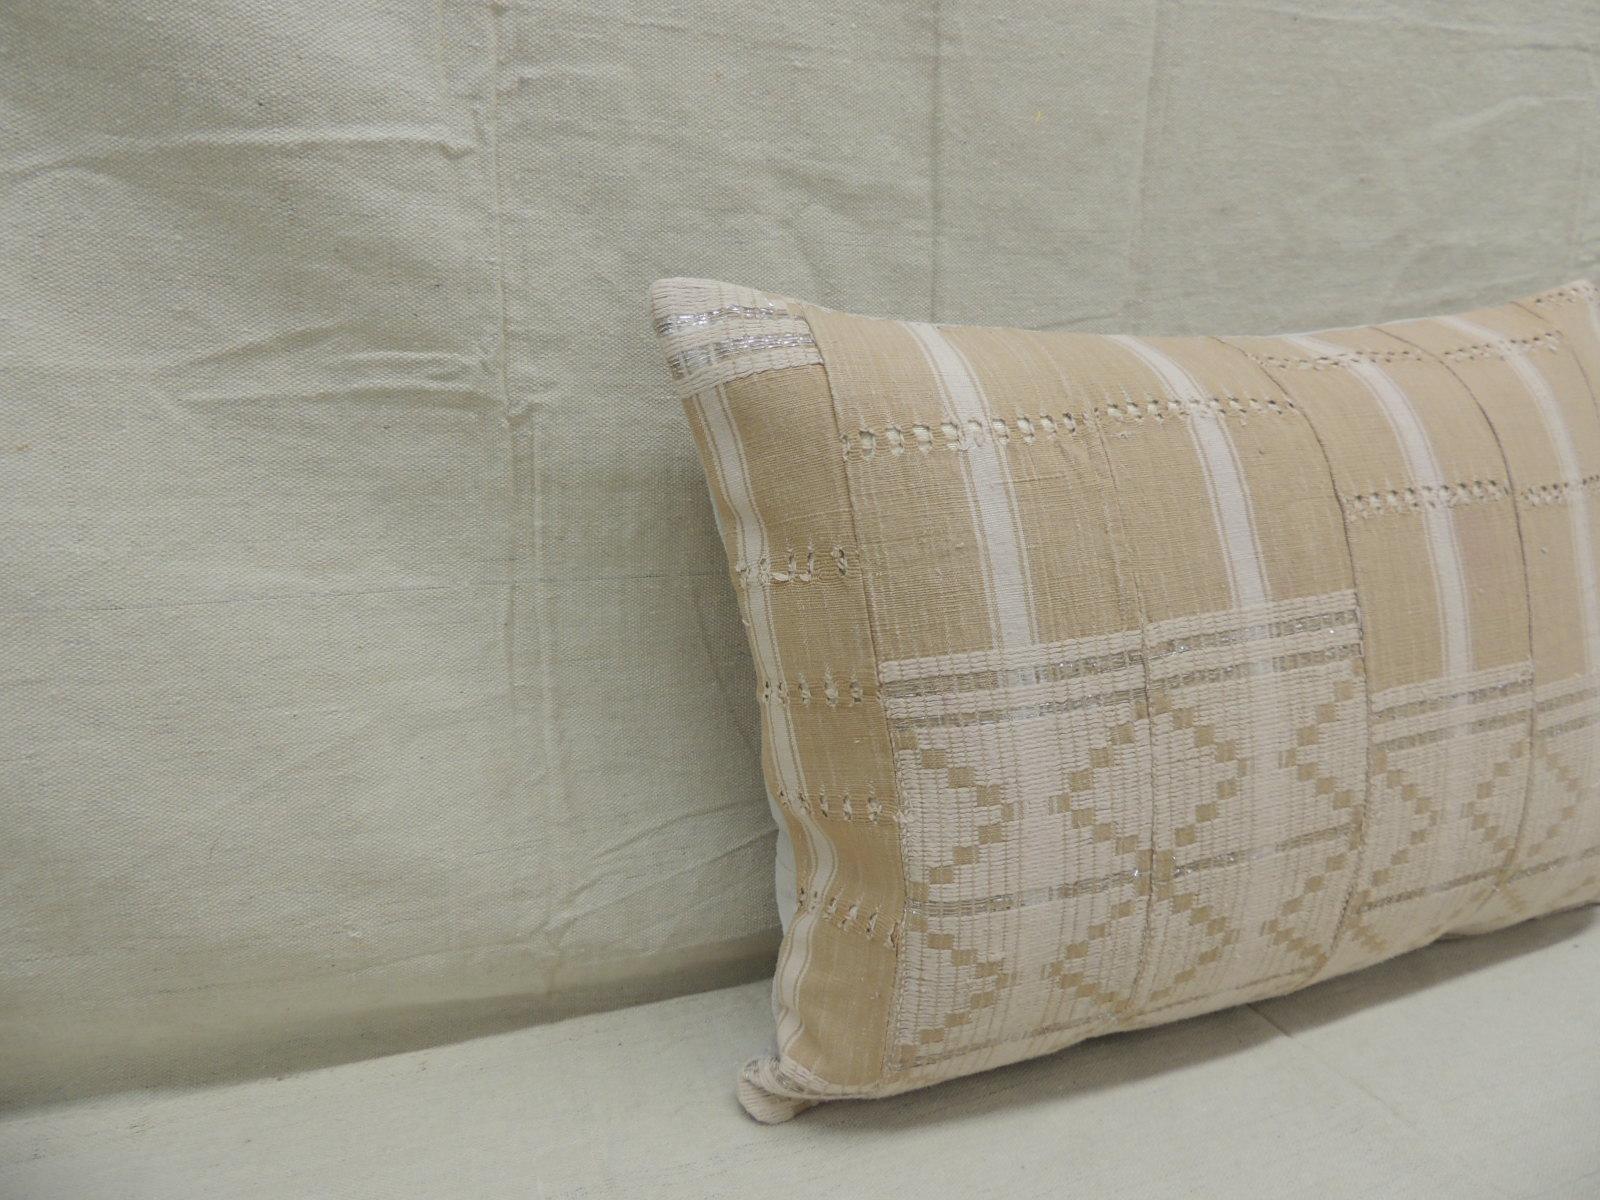 Vintage tan and brown woven ewe stripweaves and white embroidery African long bolster
 decorative pillow with silver embroidered metallic threads.
With textured grey cotton backing.
Decorative pillow handcrafted and designed in the USA.
Closure